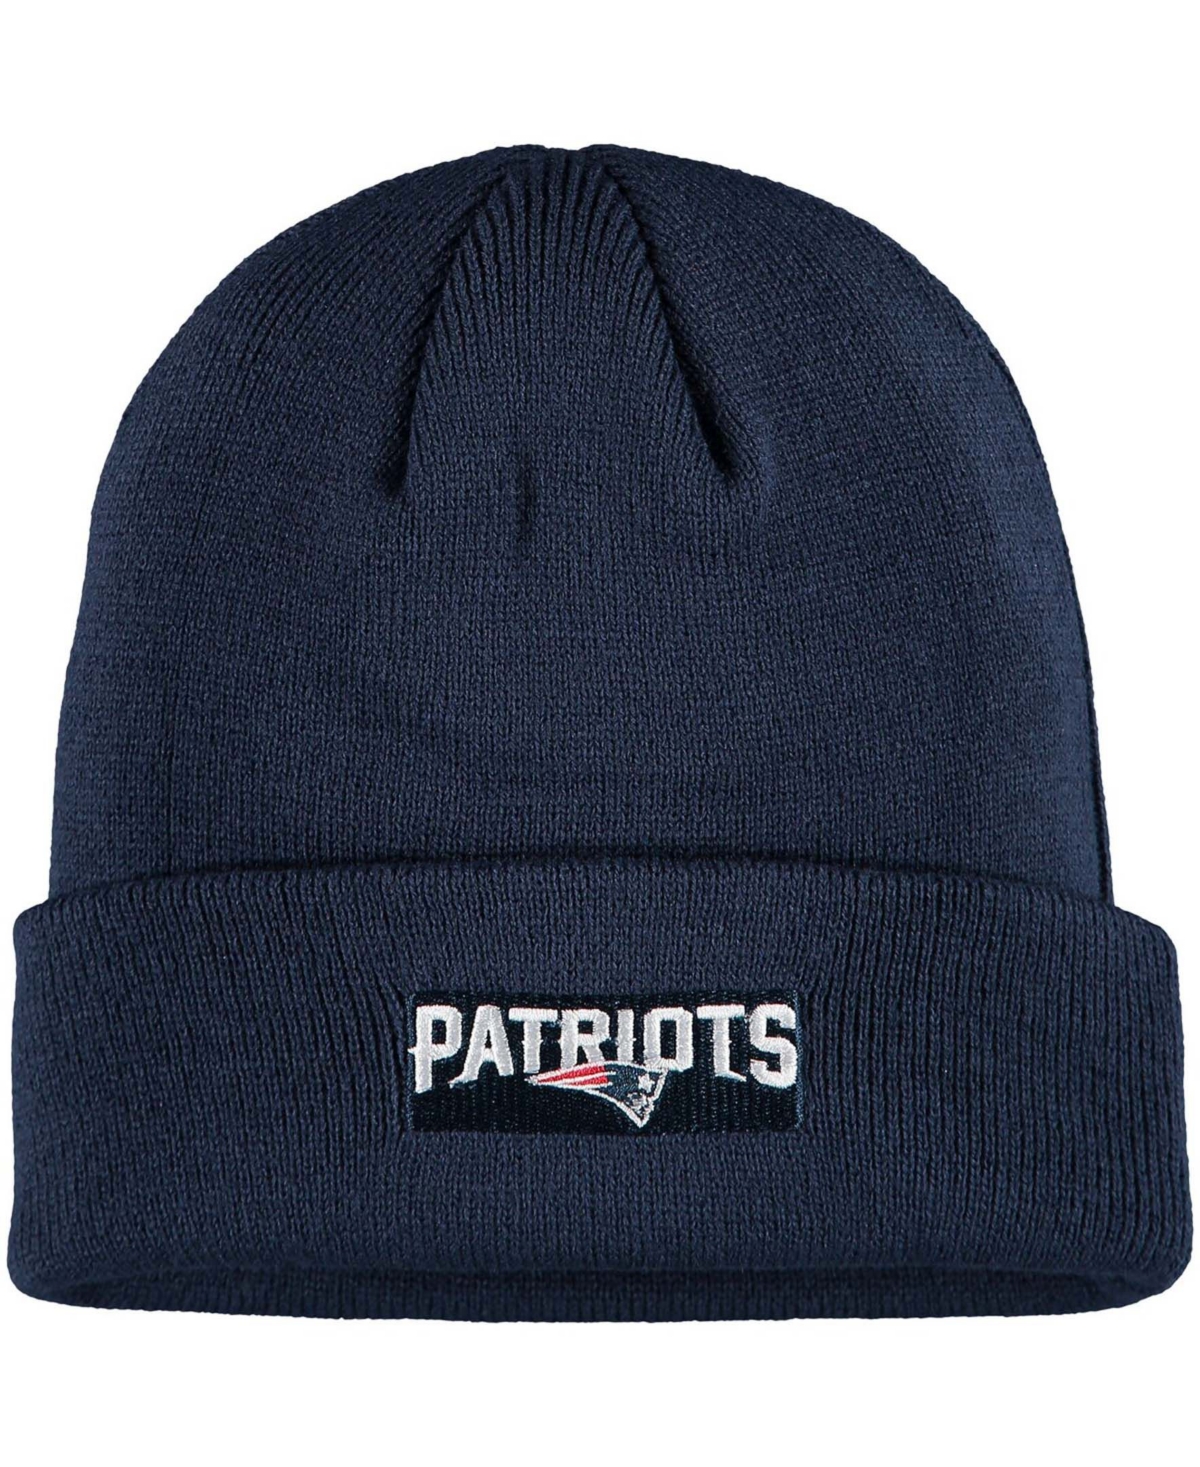 Shop Outerstuff Big Boys And Girls Navy New England Patriots Basic Cuffed Knit Hat